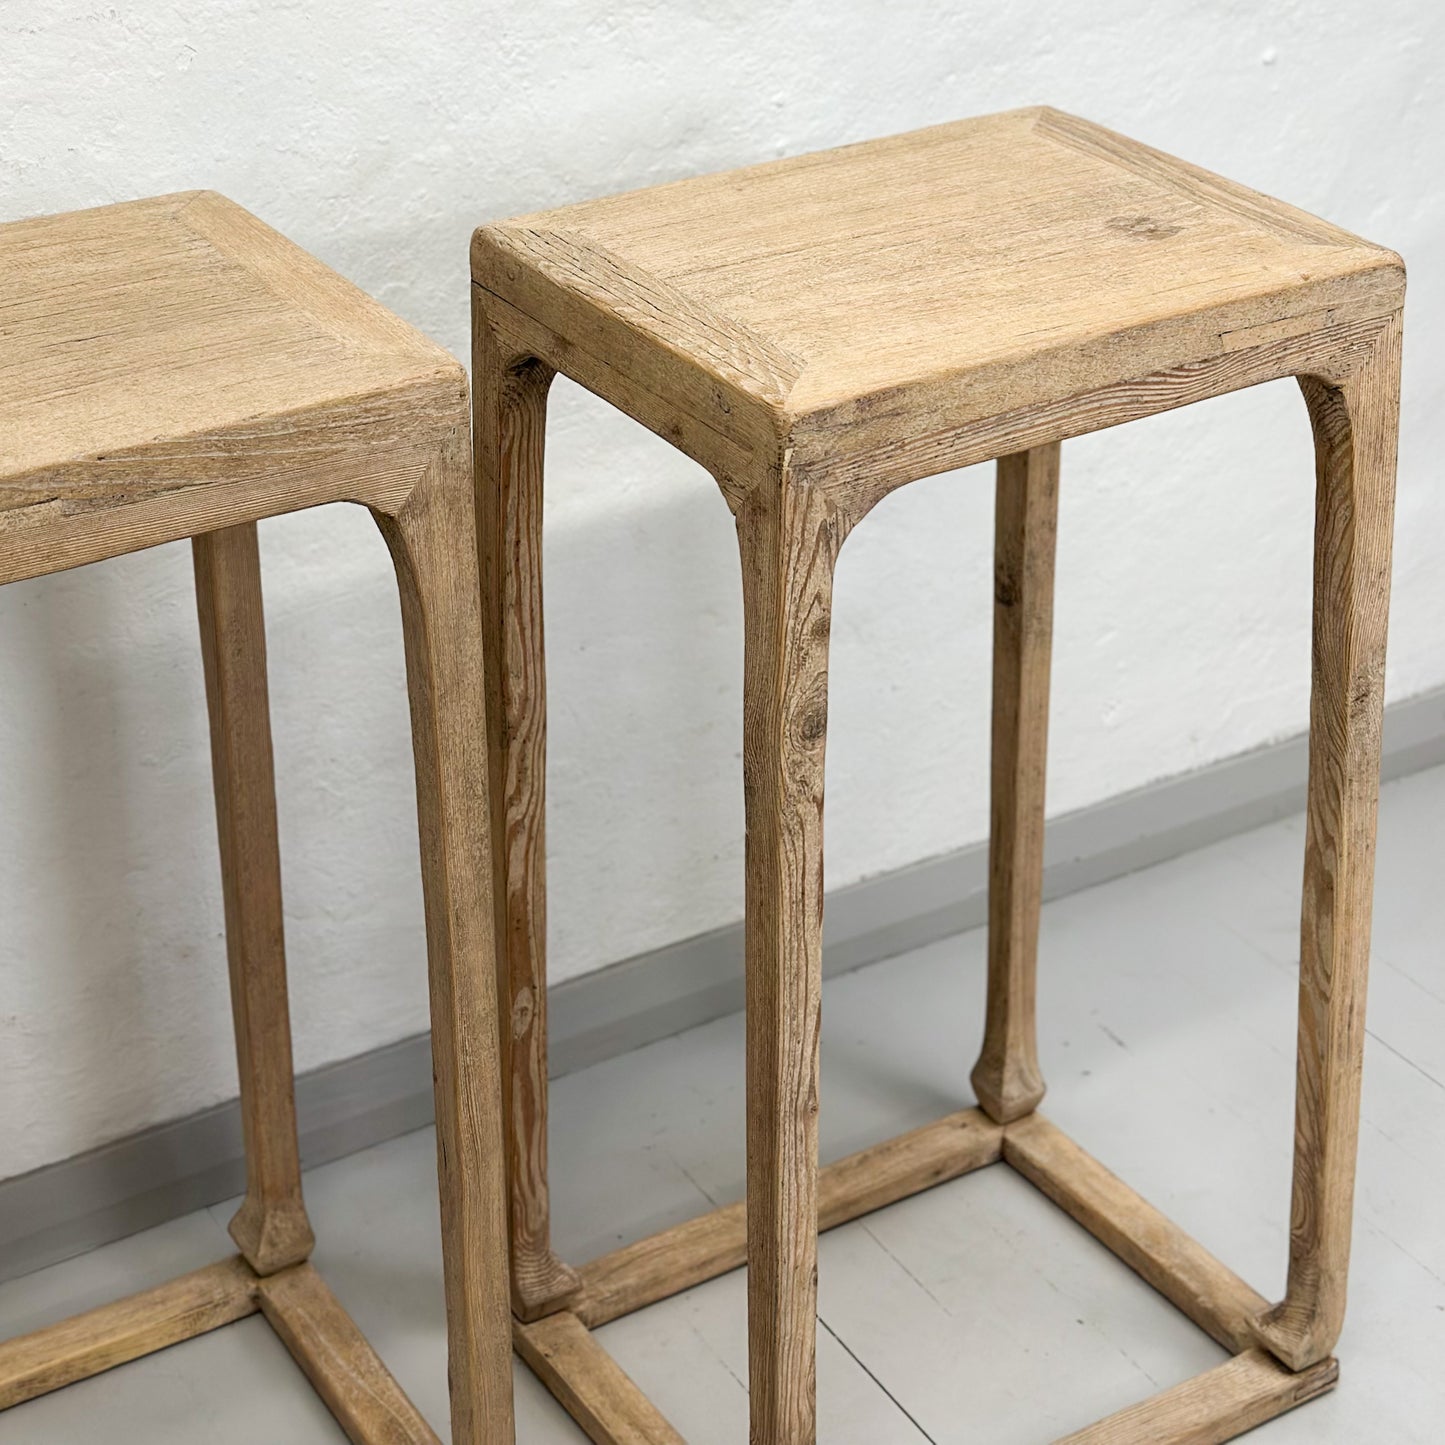 Rustic Elm Vase Table with Foot Brace